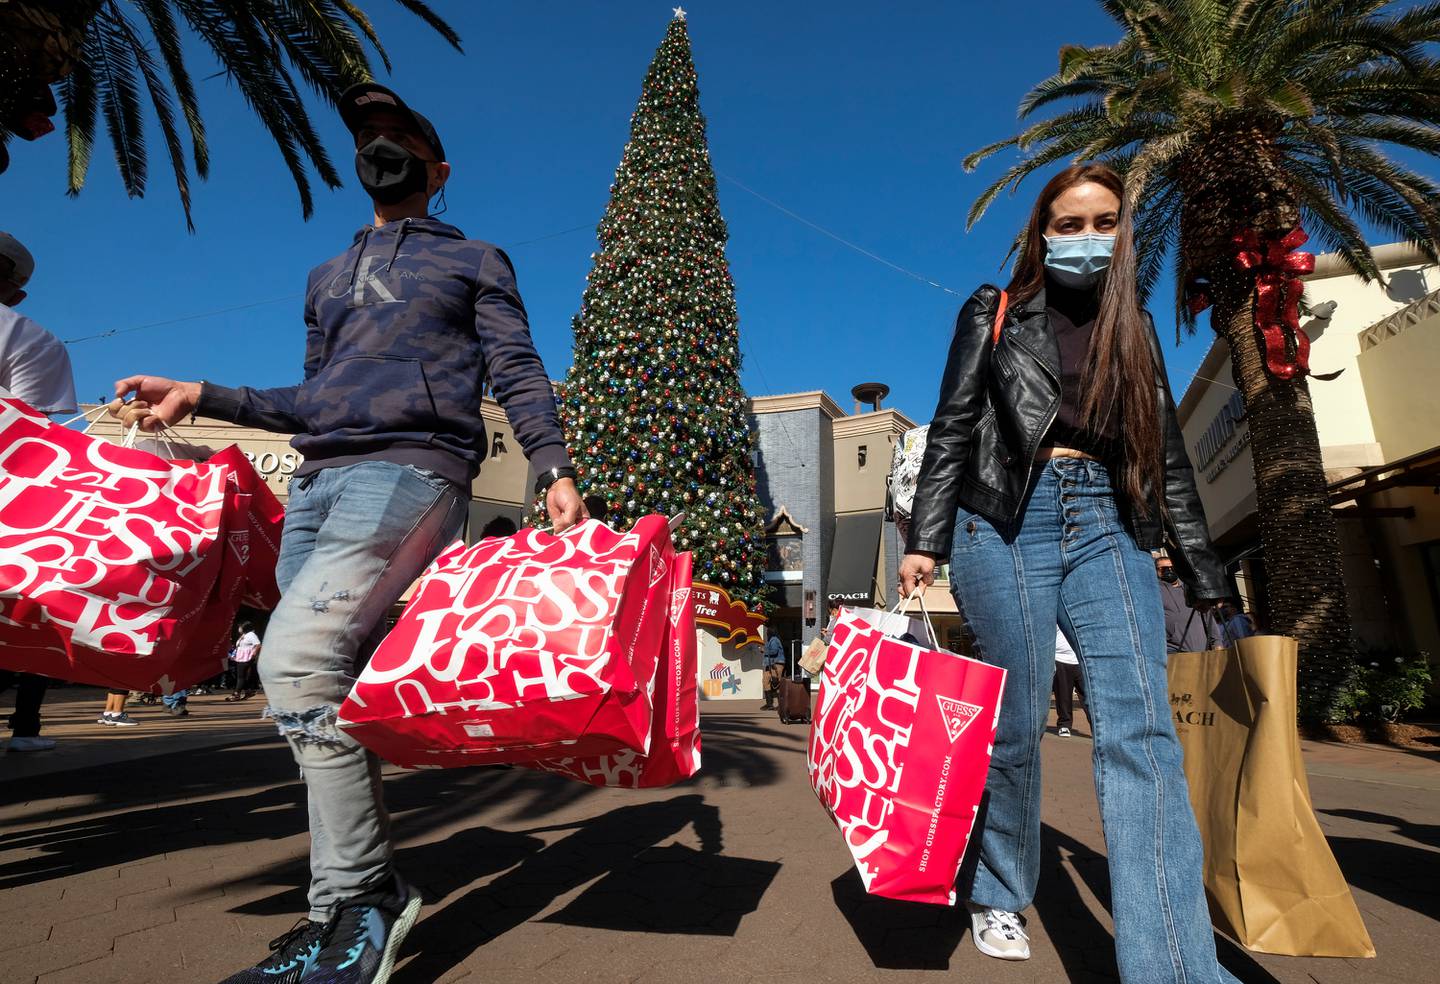 Shoppers at the Citadel Outlets in Commerce, Calif. on Friday, Nov. 27, 2020.